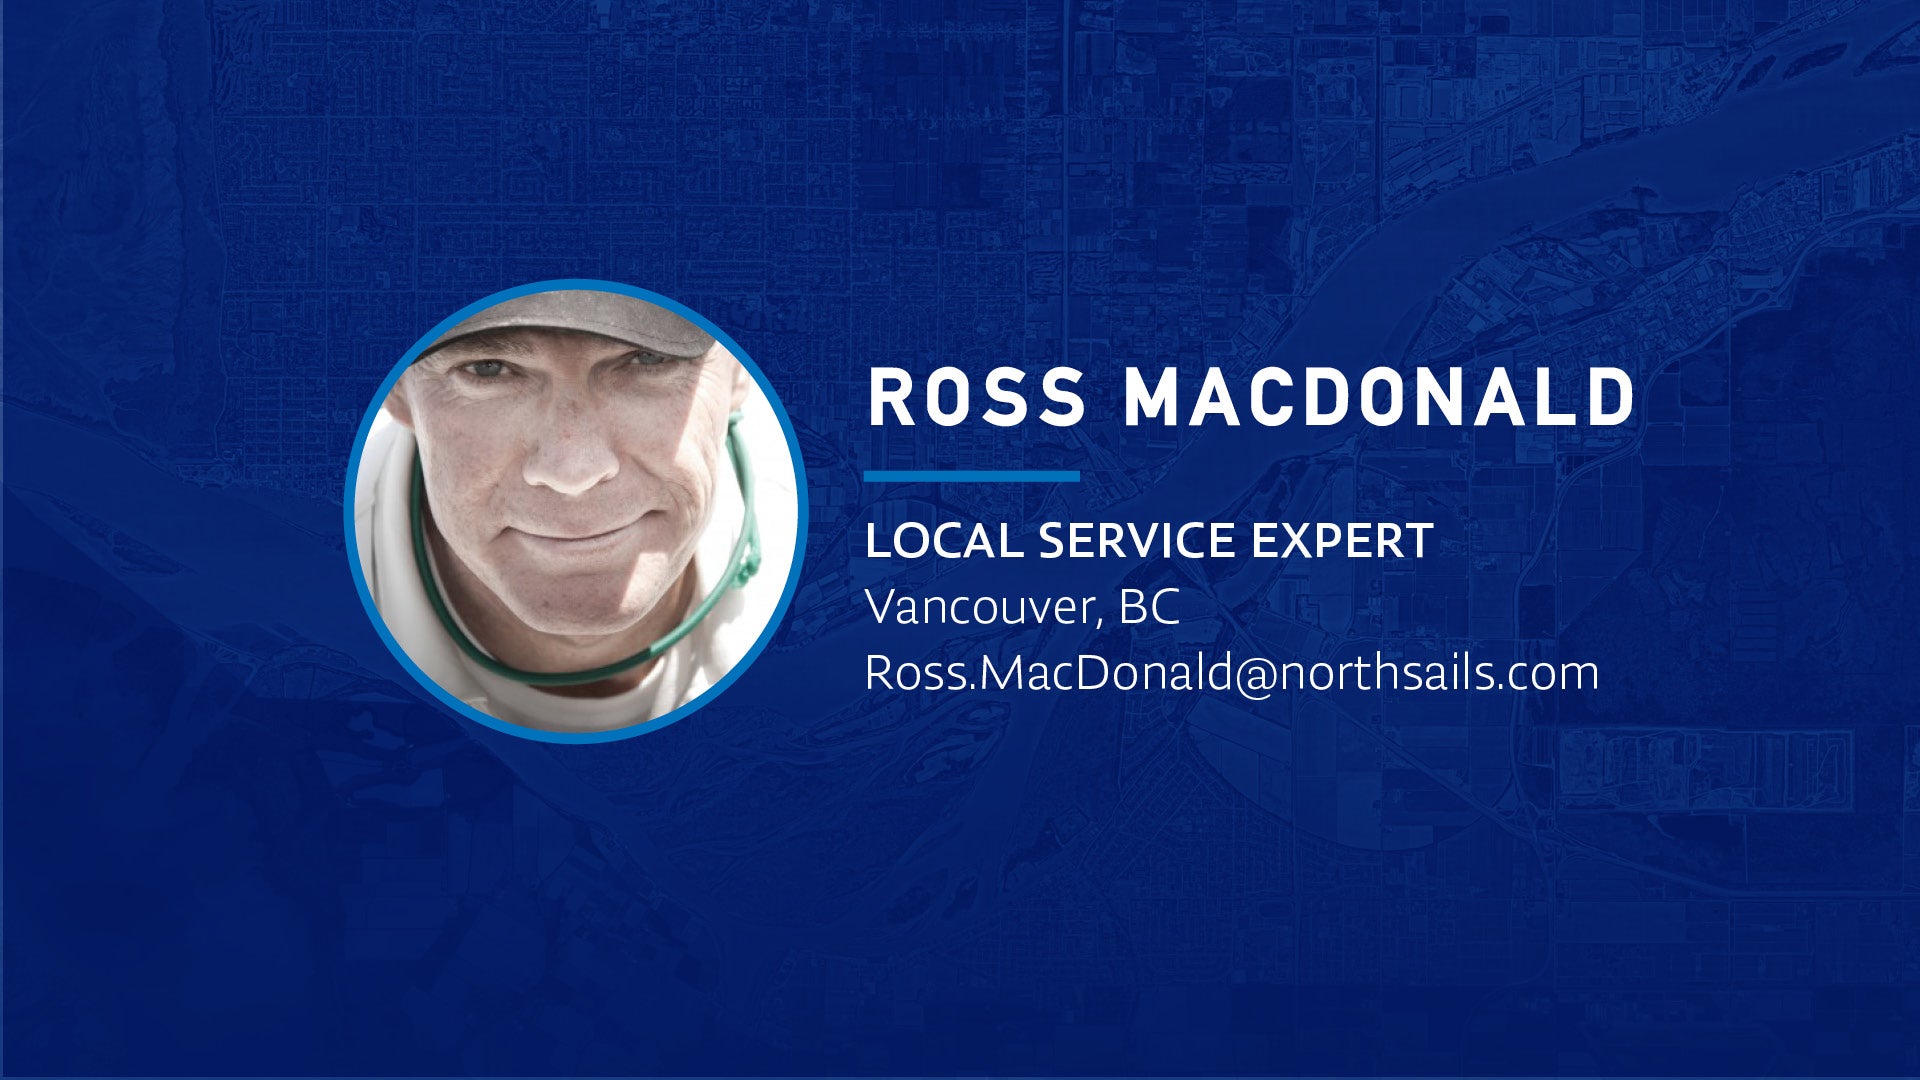 WHO WE ARE: ROSS MACDONALD